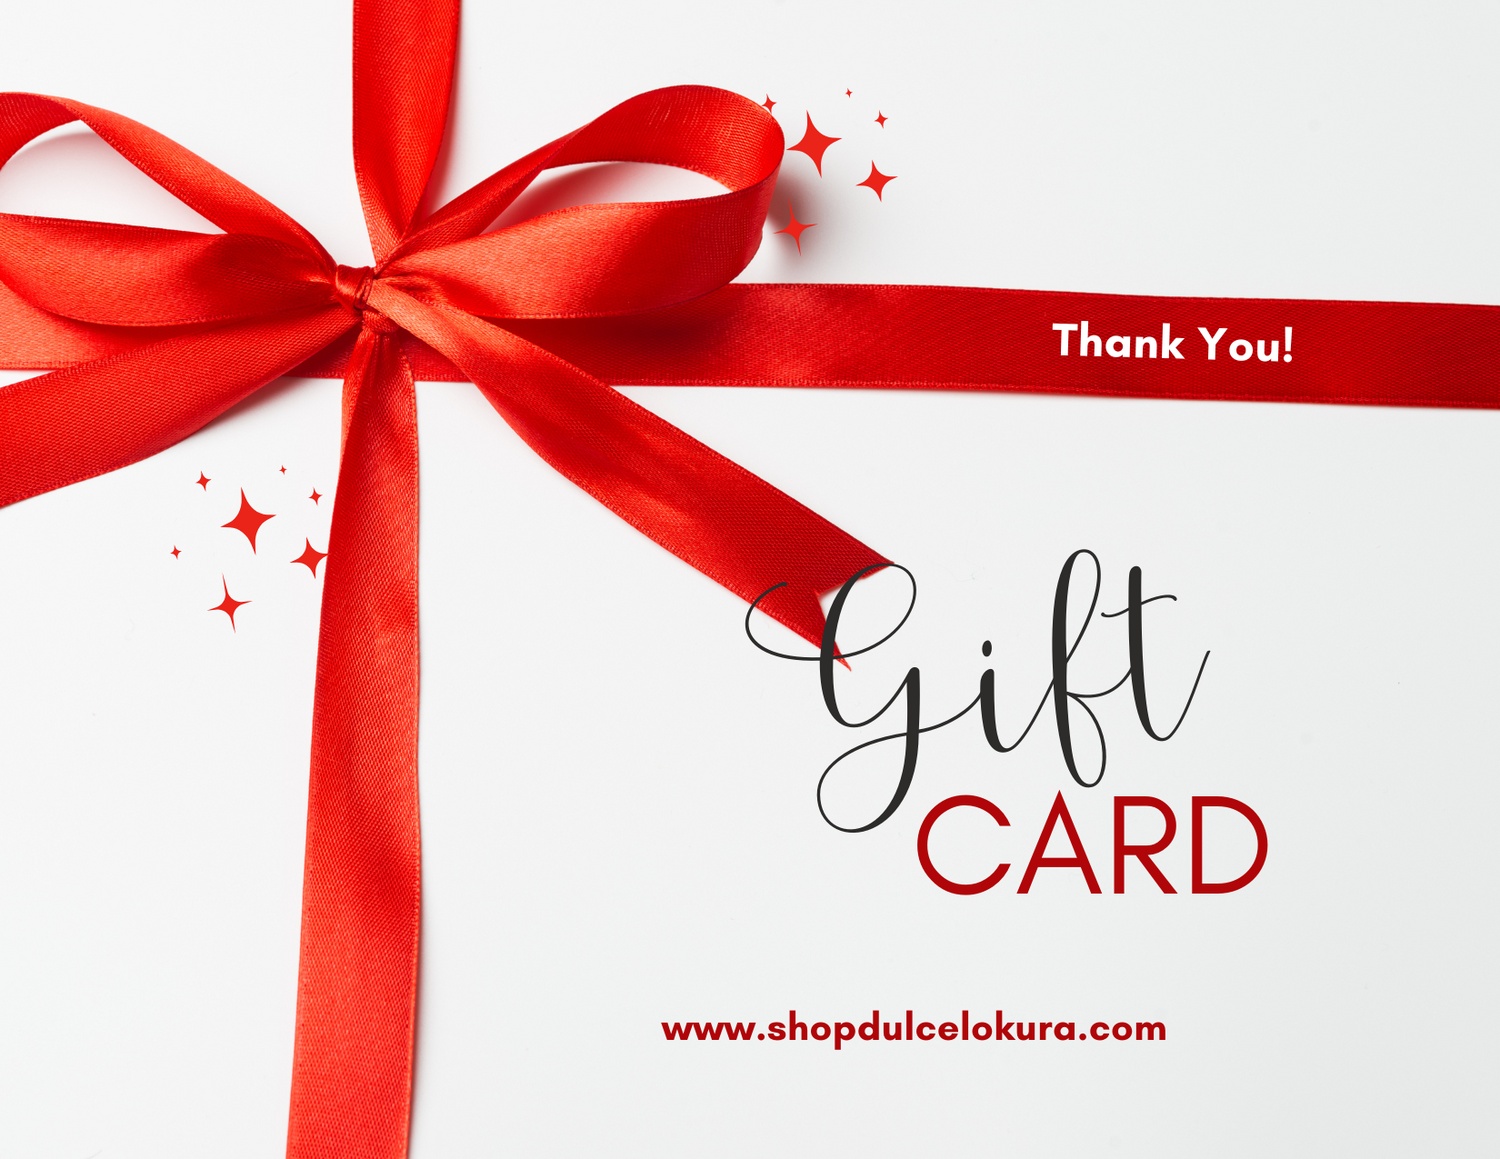 Gift Cards are now available!!!